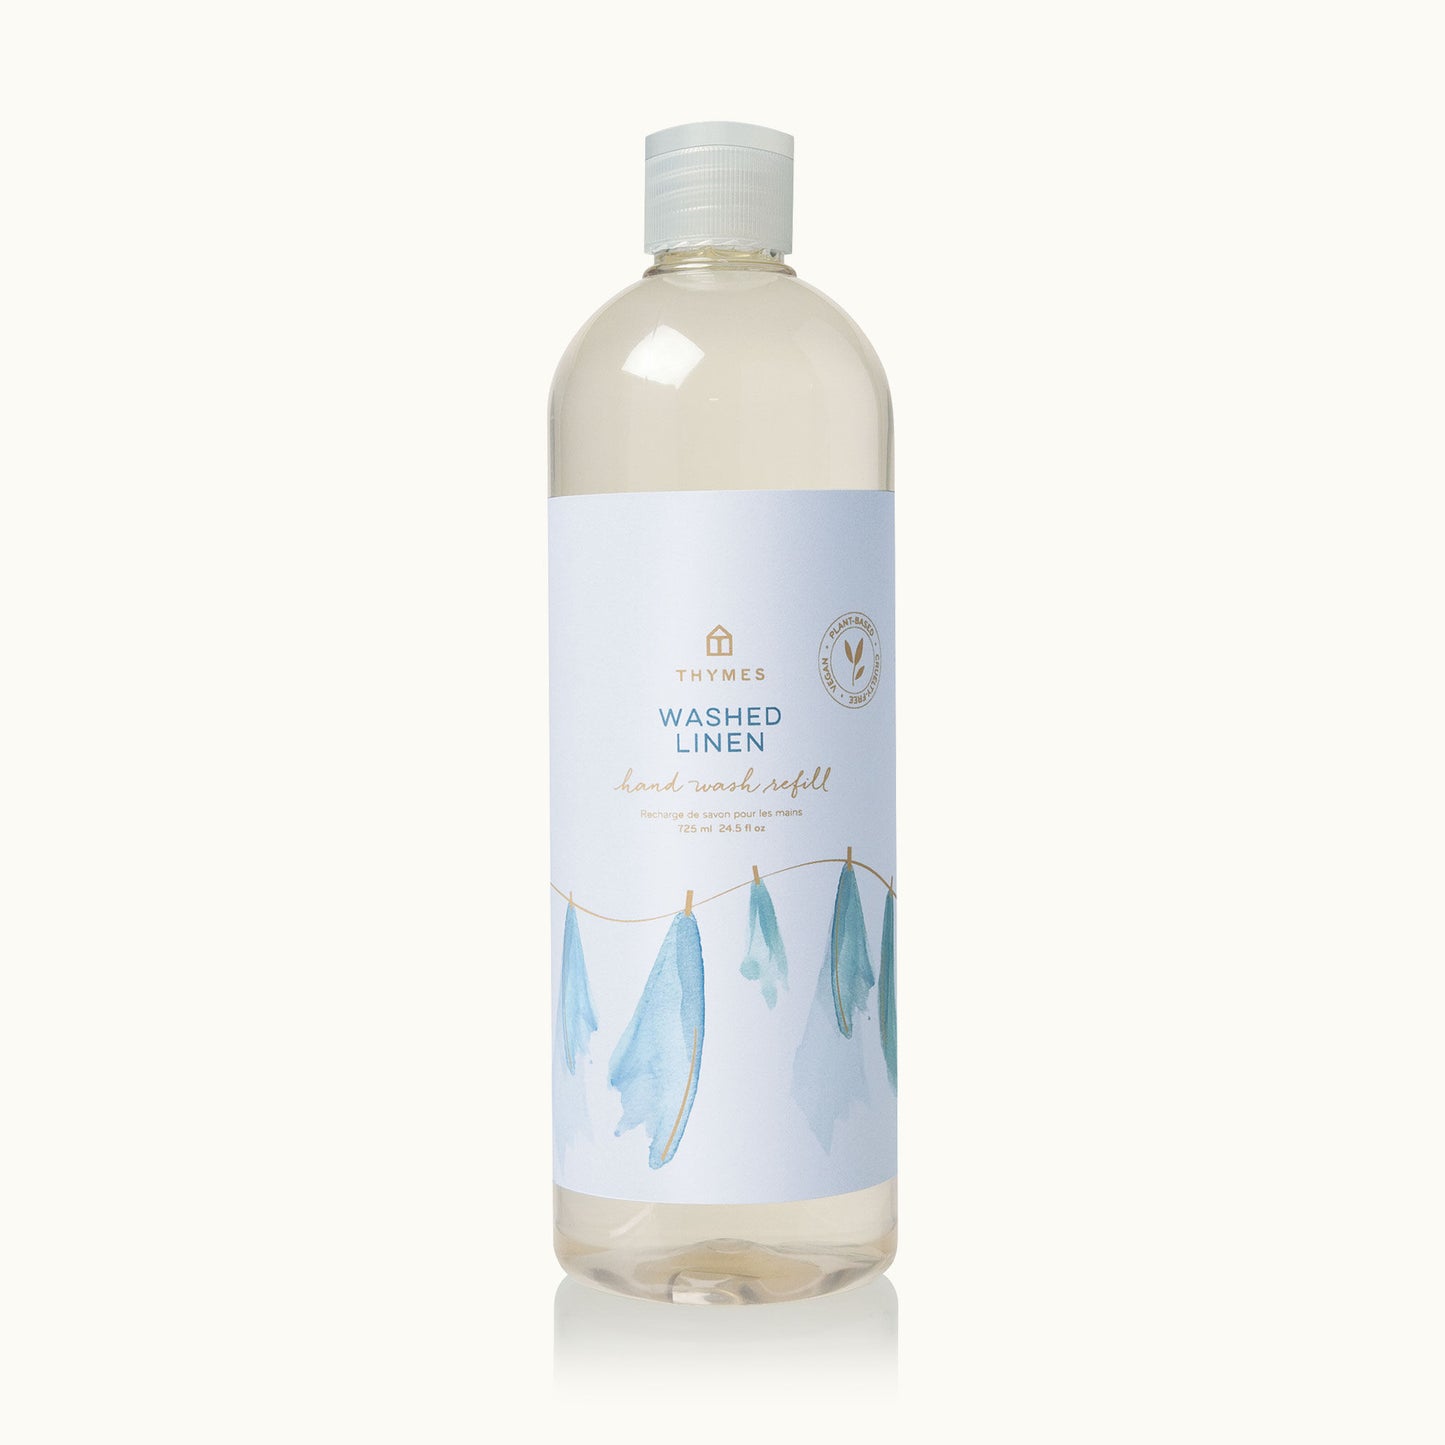 Thymes  Hand Wash Refill, Washed Linen